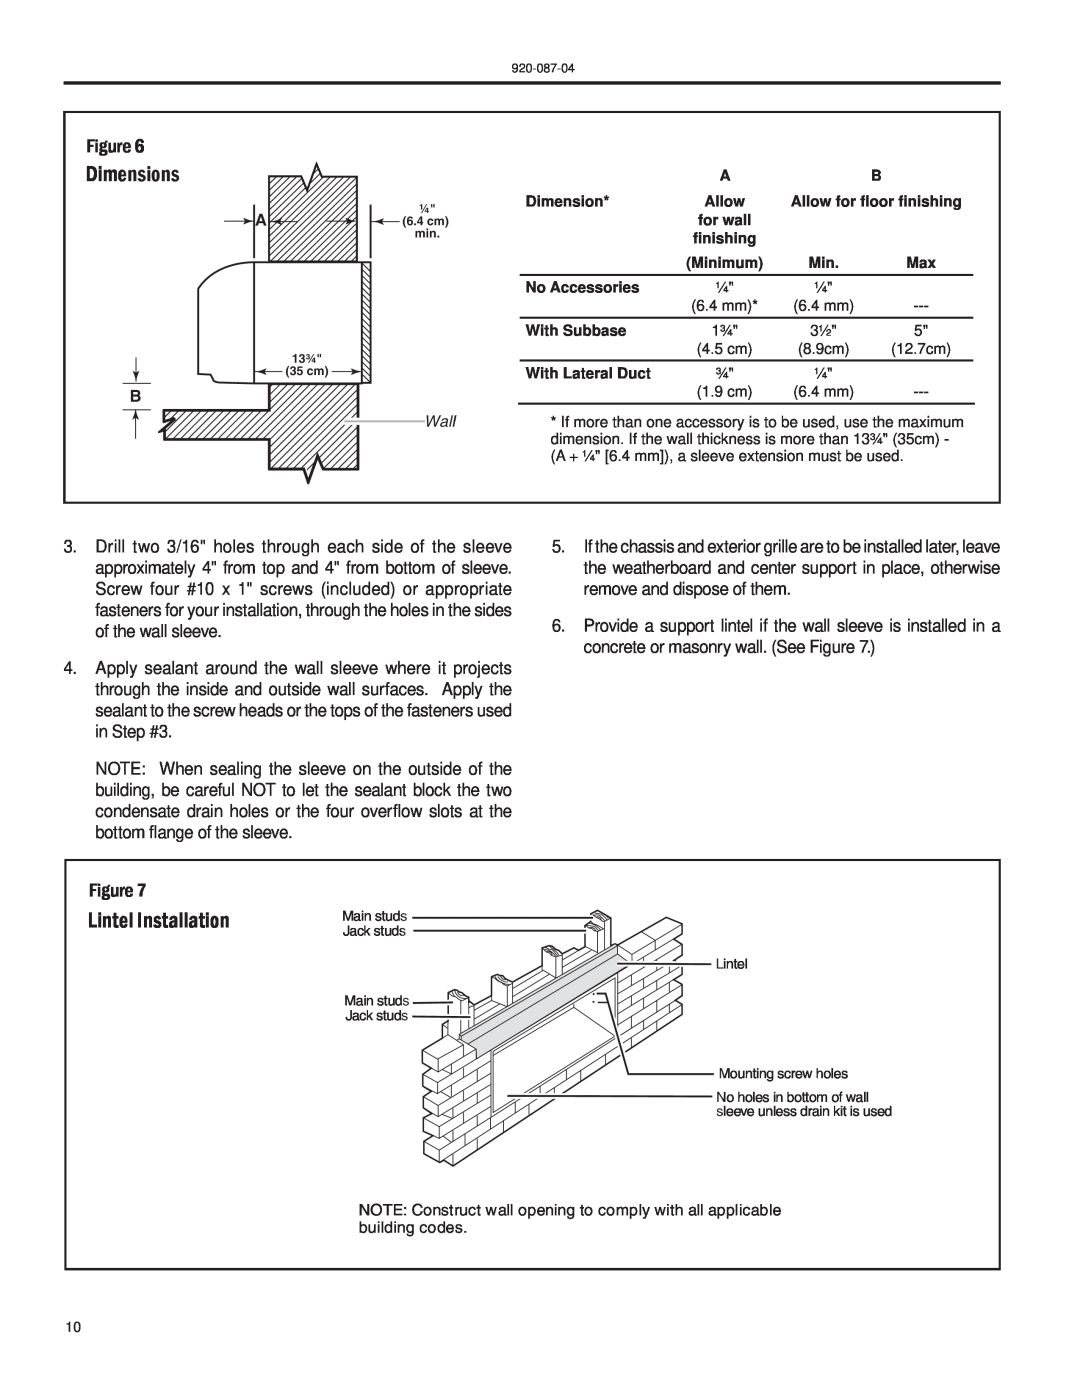 Friedrich HEAT PUMPS manual Dimensions, Lintel Installation, Allow, No Accessories, With Subbase, With Lateral Duct 